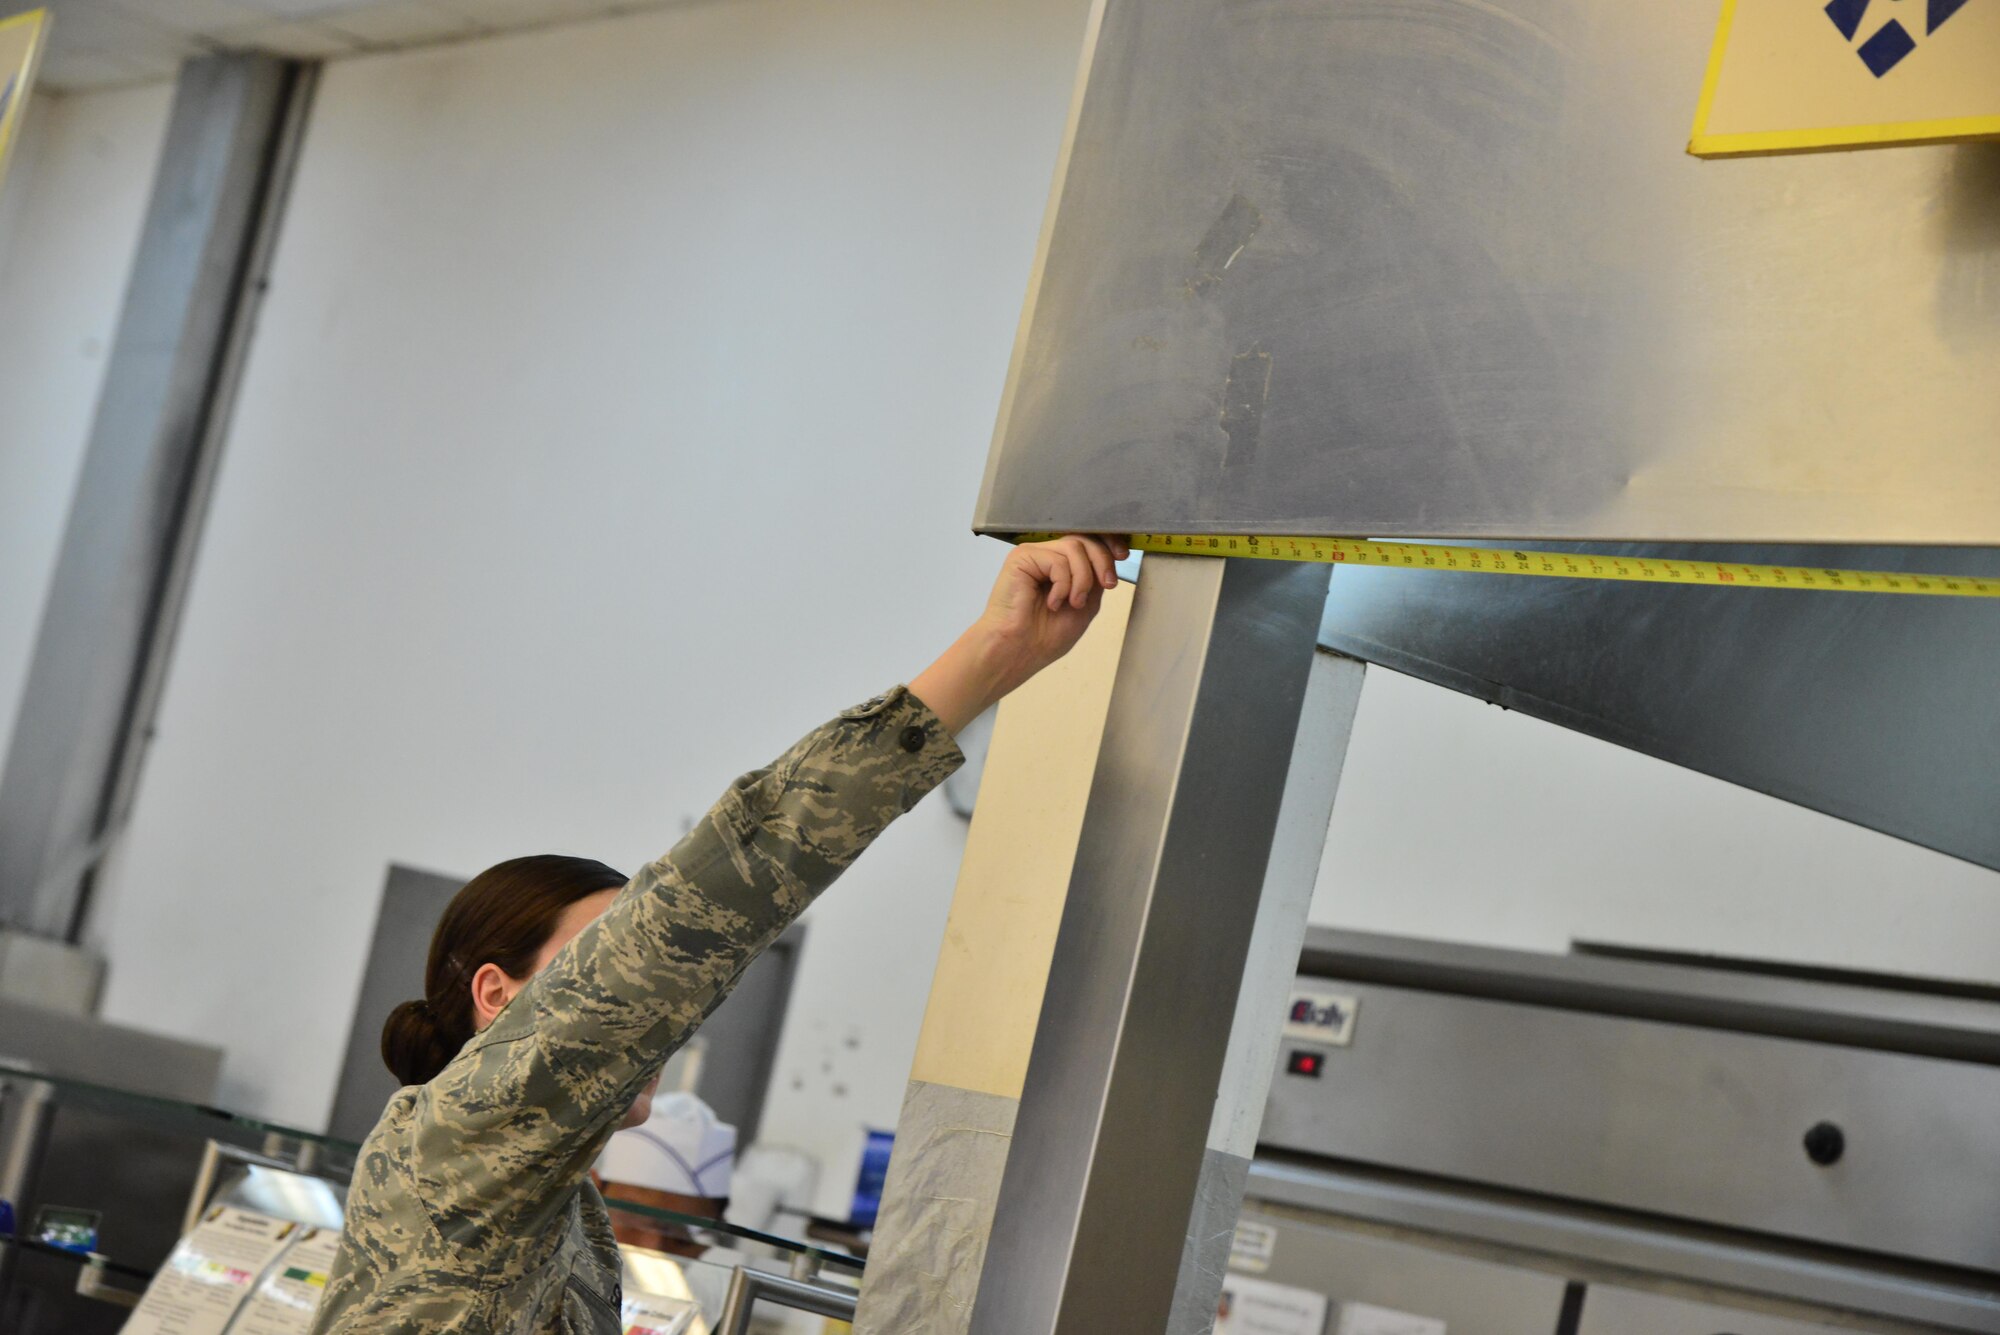 Senior Airman Leah Smith, 379th Expeditionary Medical Operations Support Squadron Bioenvironmental, helps measure the dimensions of a ventilation system inside a dining facility before conducting test for air flow rate September 30, 2015 at Al Udeid Air Base, Qatar. (U.S. Air Force photo/Staff Sgt. Alexandre Montes)